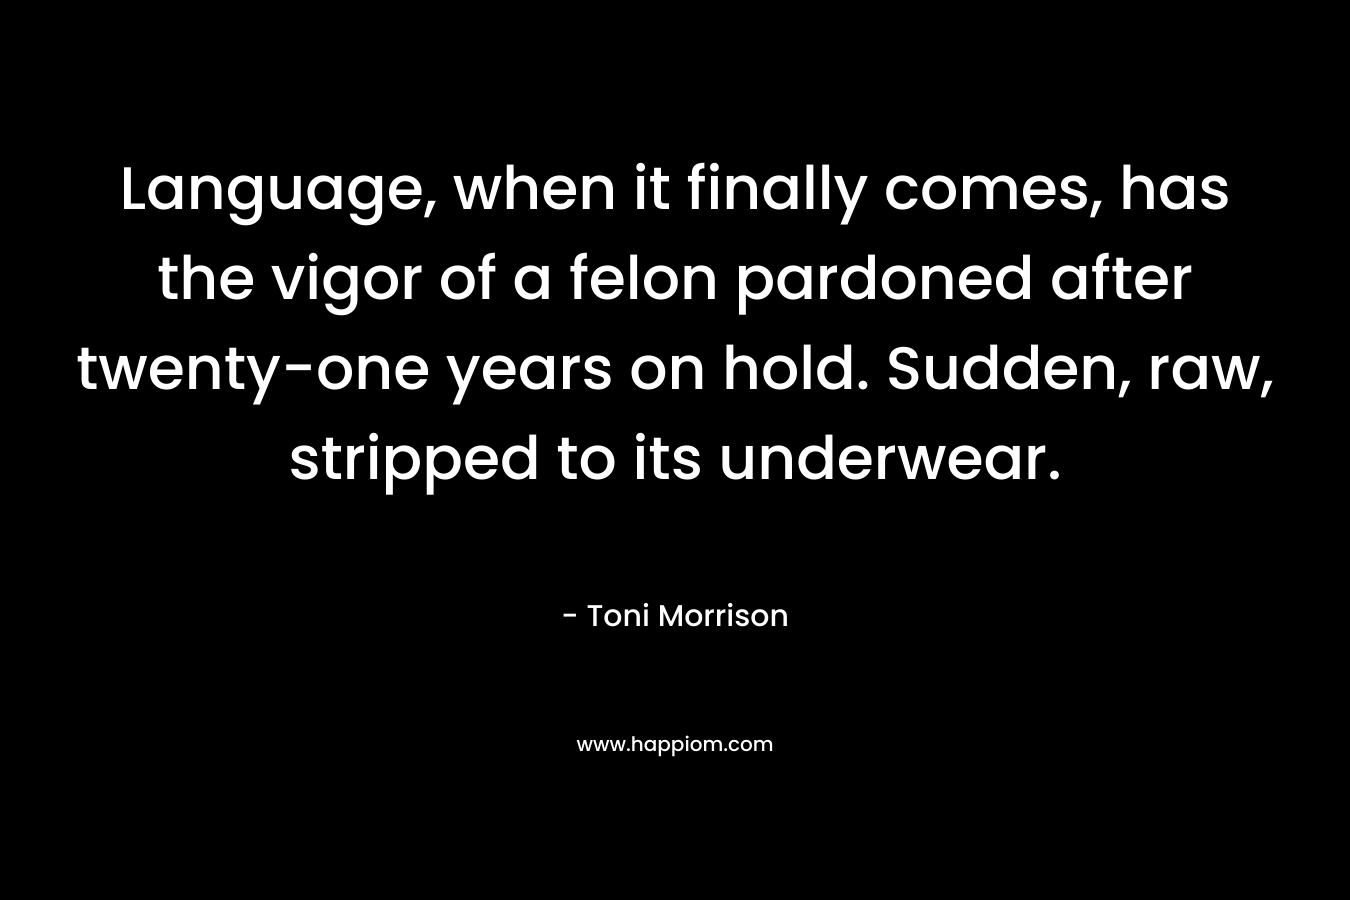 Language, when it finally comes, has the vigor of a felon pardoned after twenty-one years on hold. Sudden, raw, stripped to its underwear. – Toni Morrison